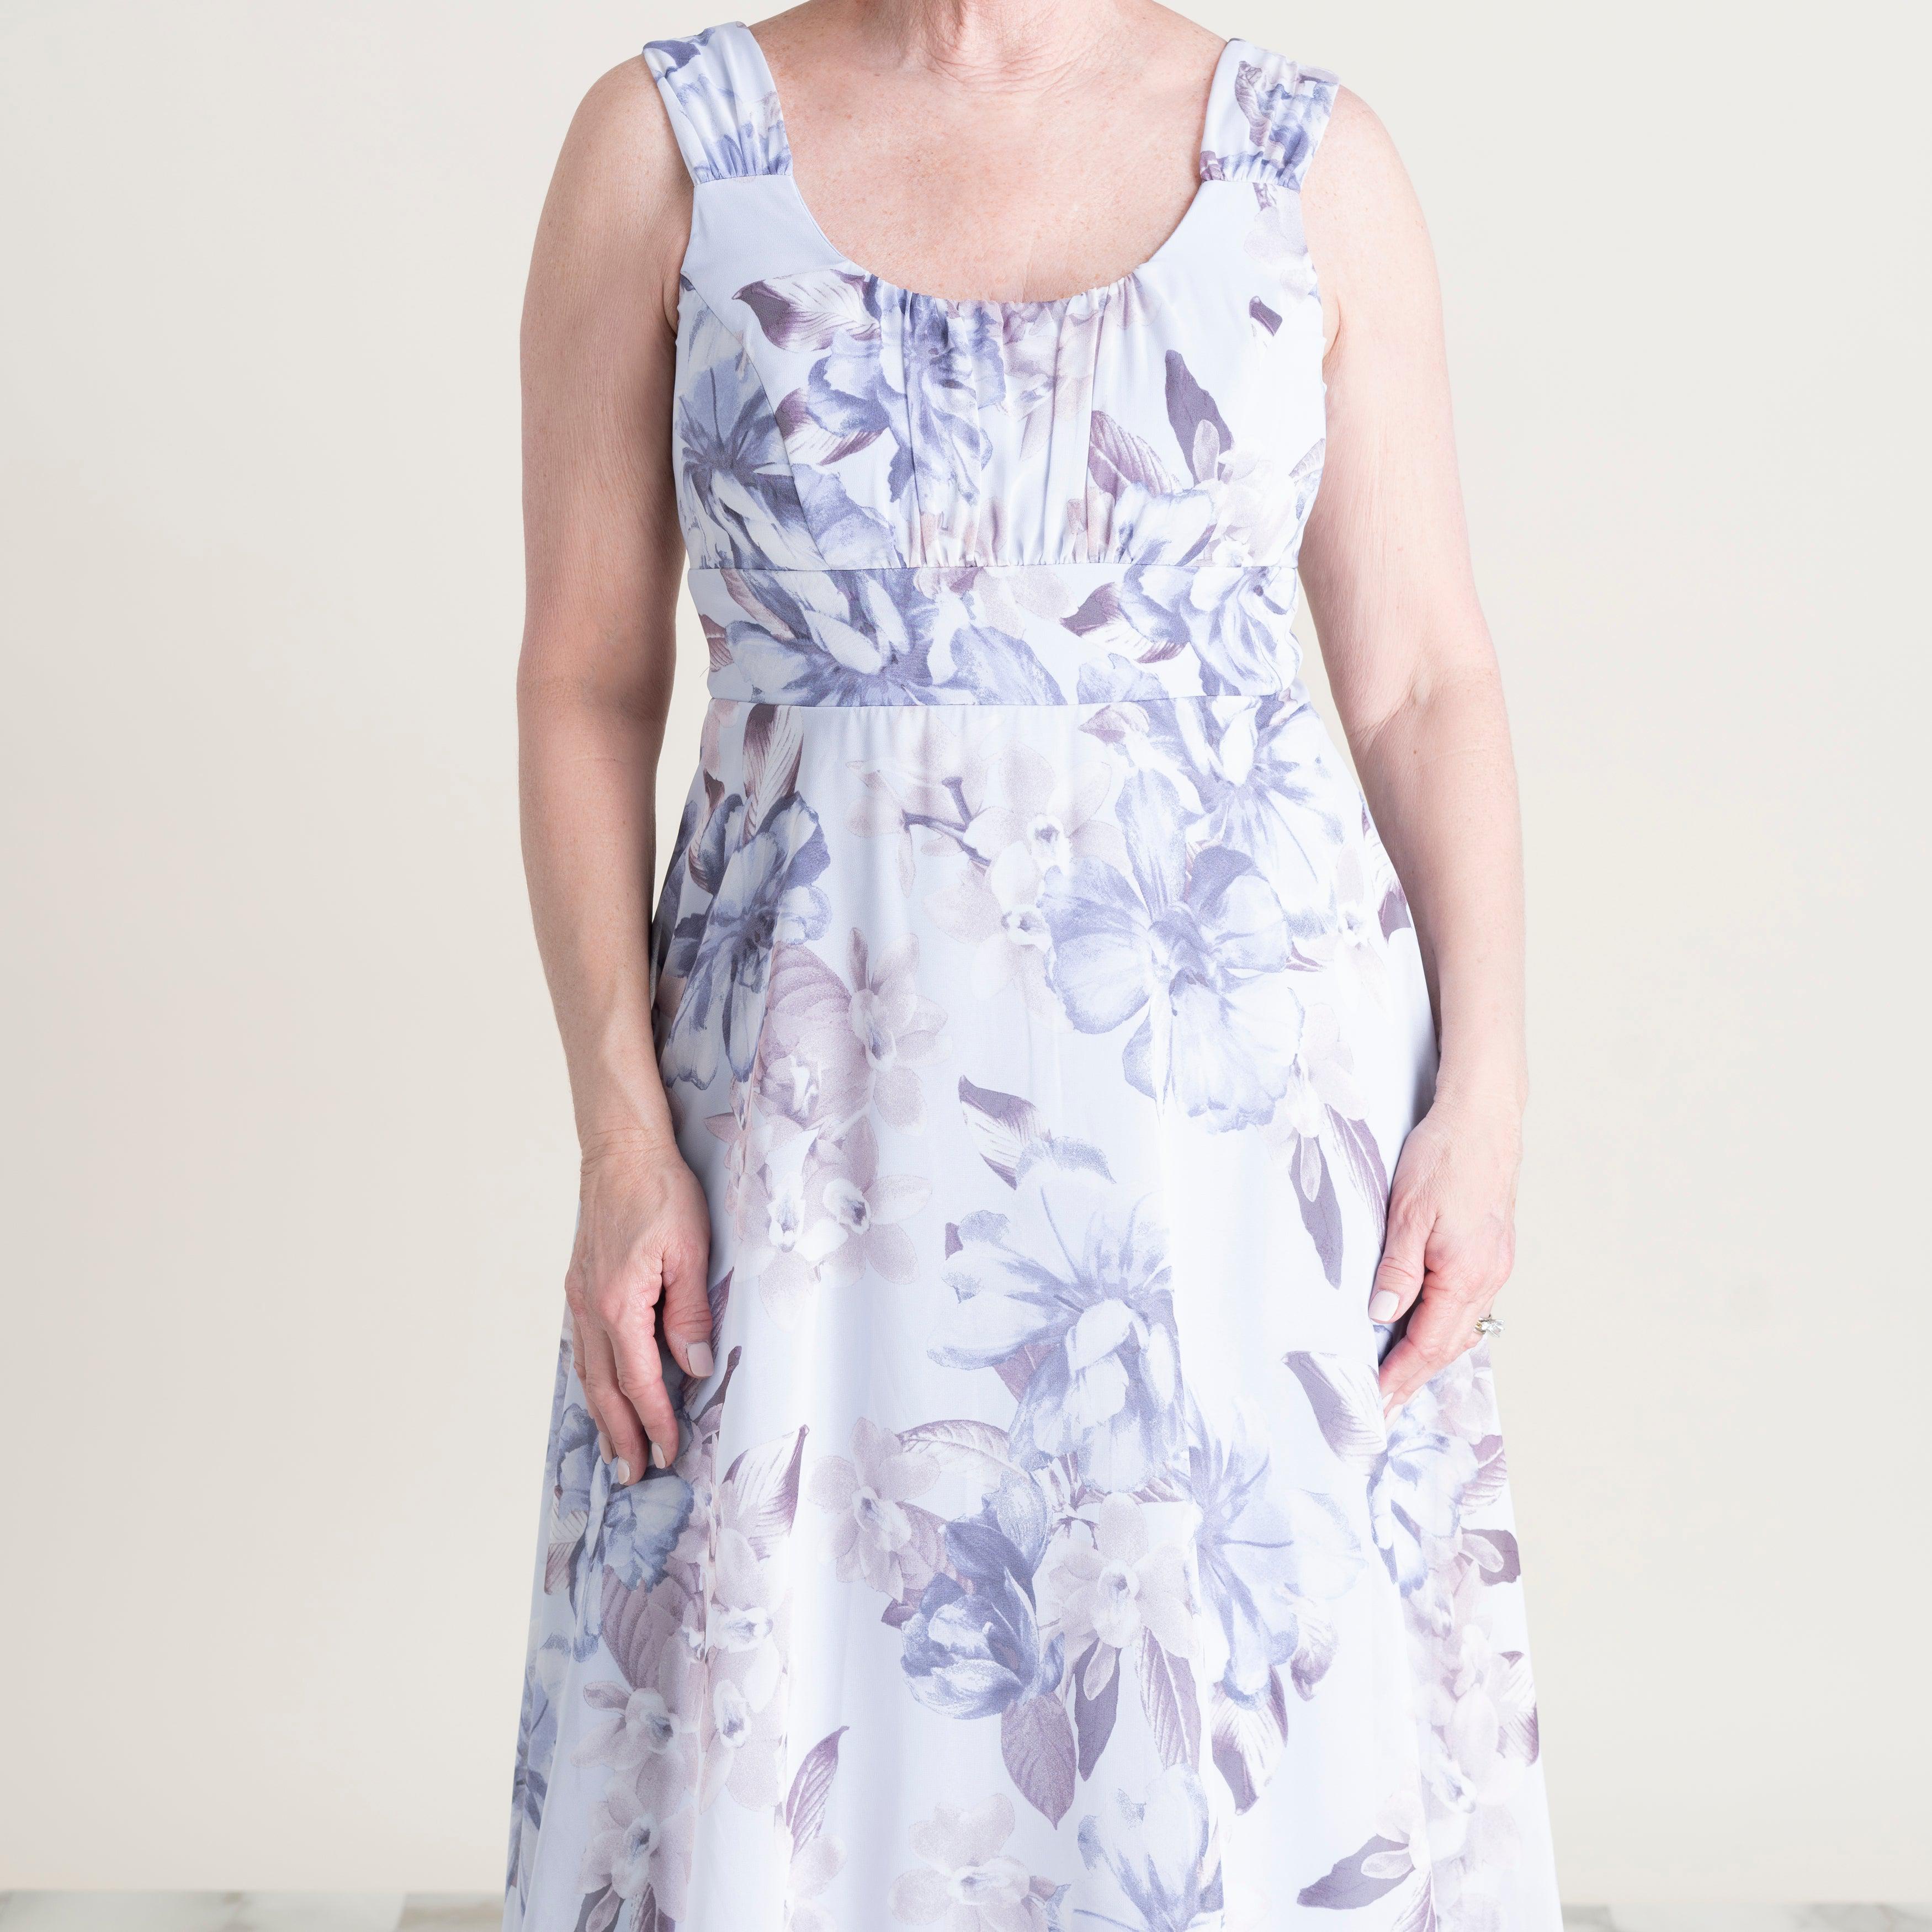 Woman posing wearing Silver Carly Silver Floral Chiffon Dress from Connected Apparel